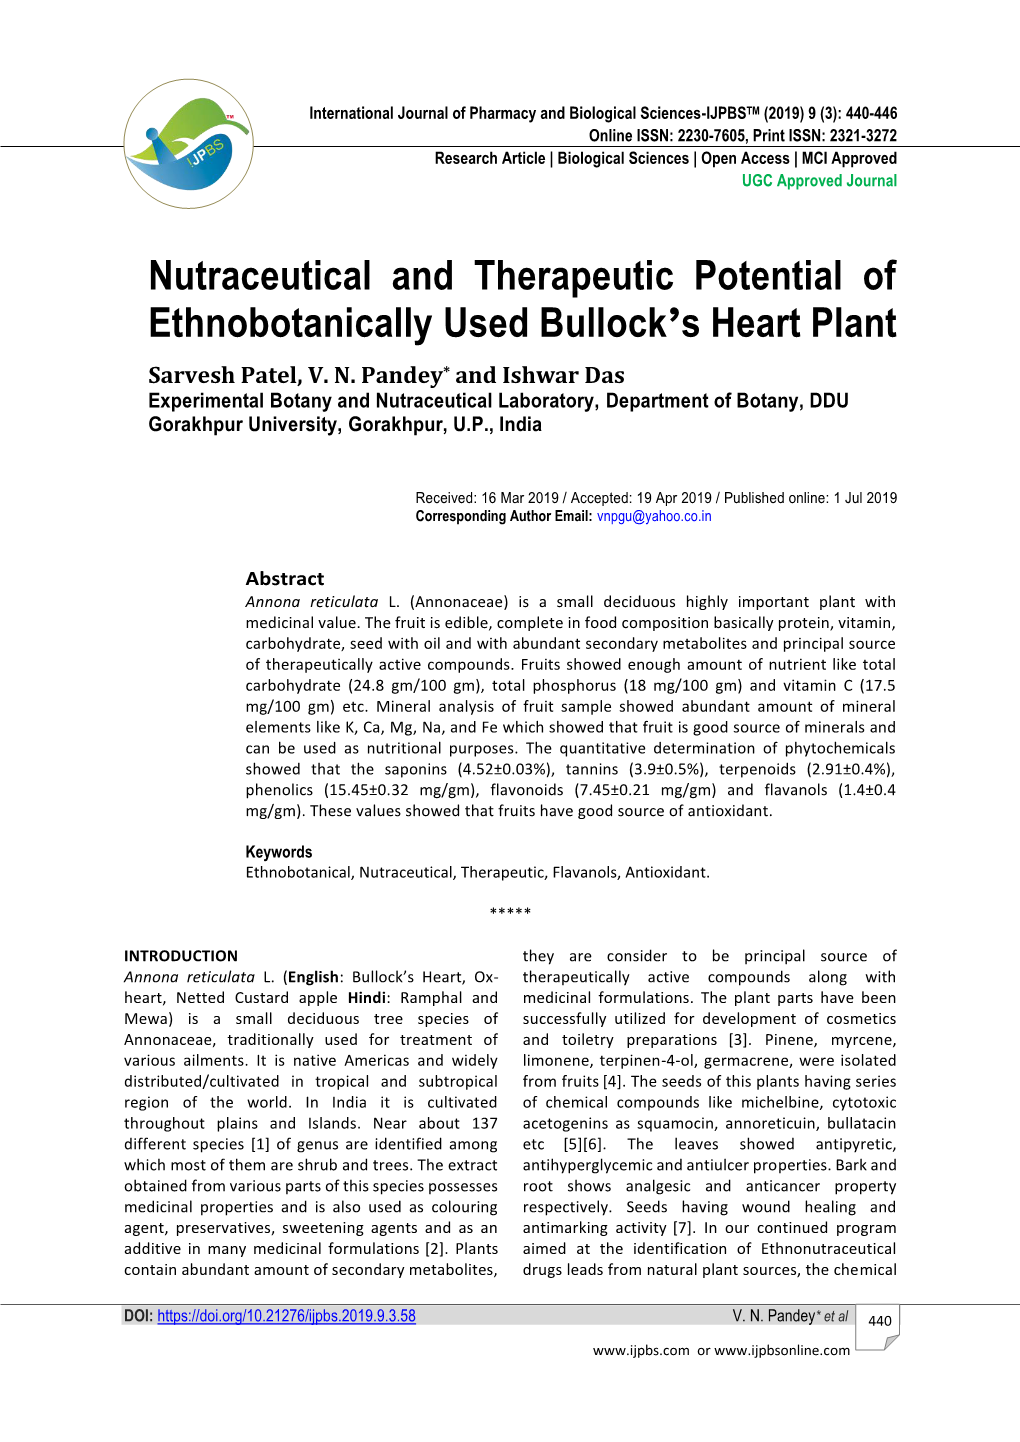 Nutraceutical and Therapeutic Potential of Ethnobotanically Used Bullock’S Heart Plant